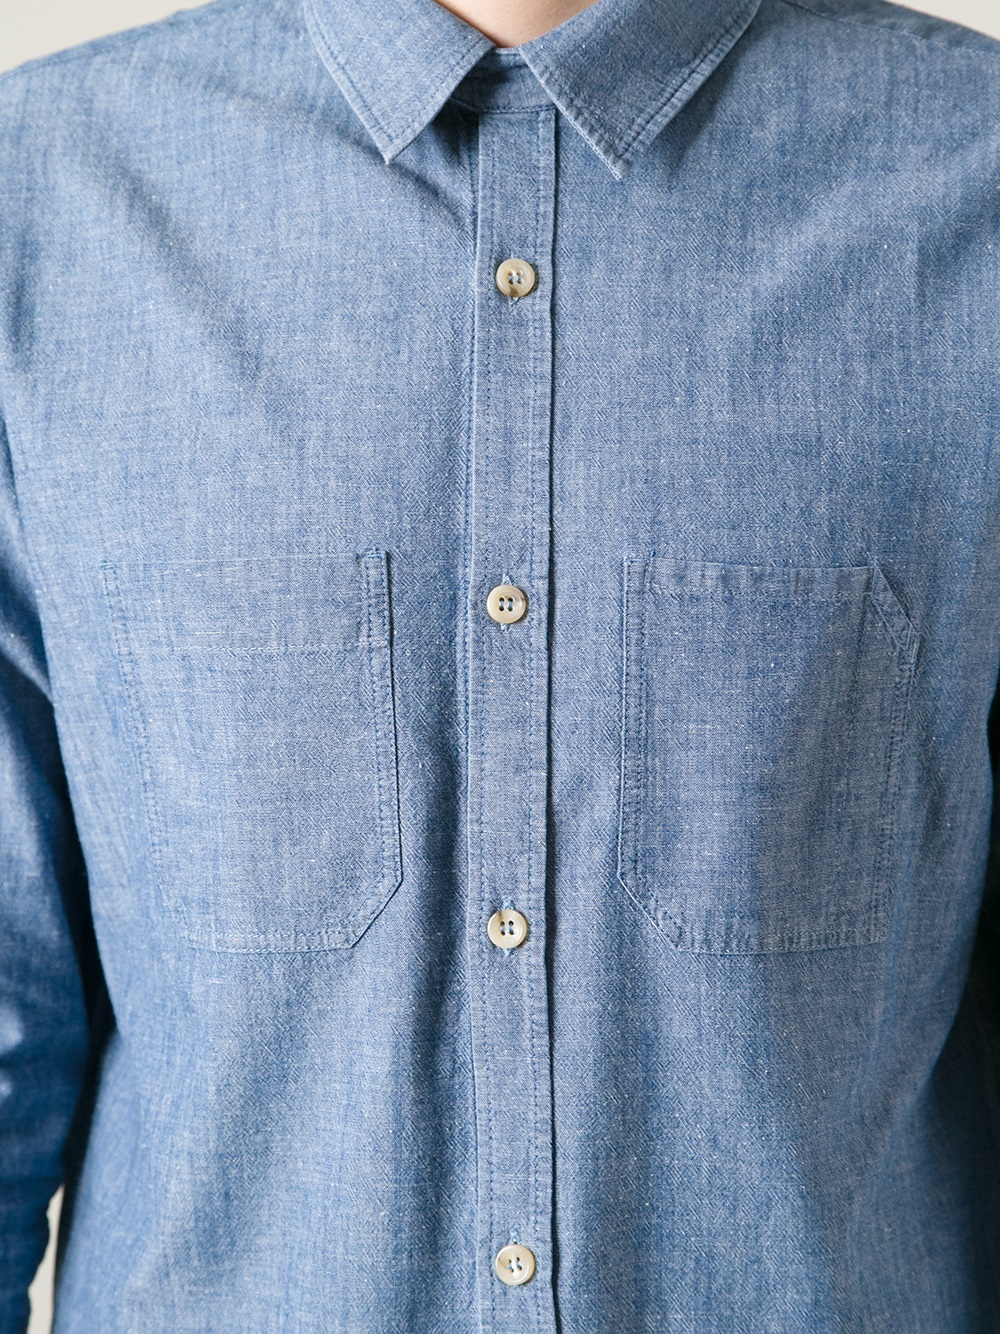 A.P.C. Chambray Work Shirt in Blue for Men - Lyst